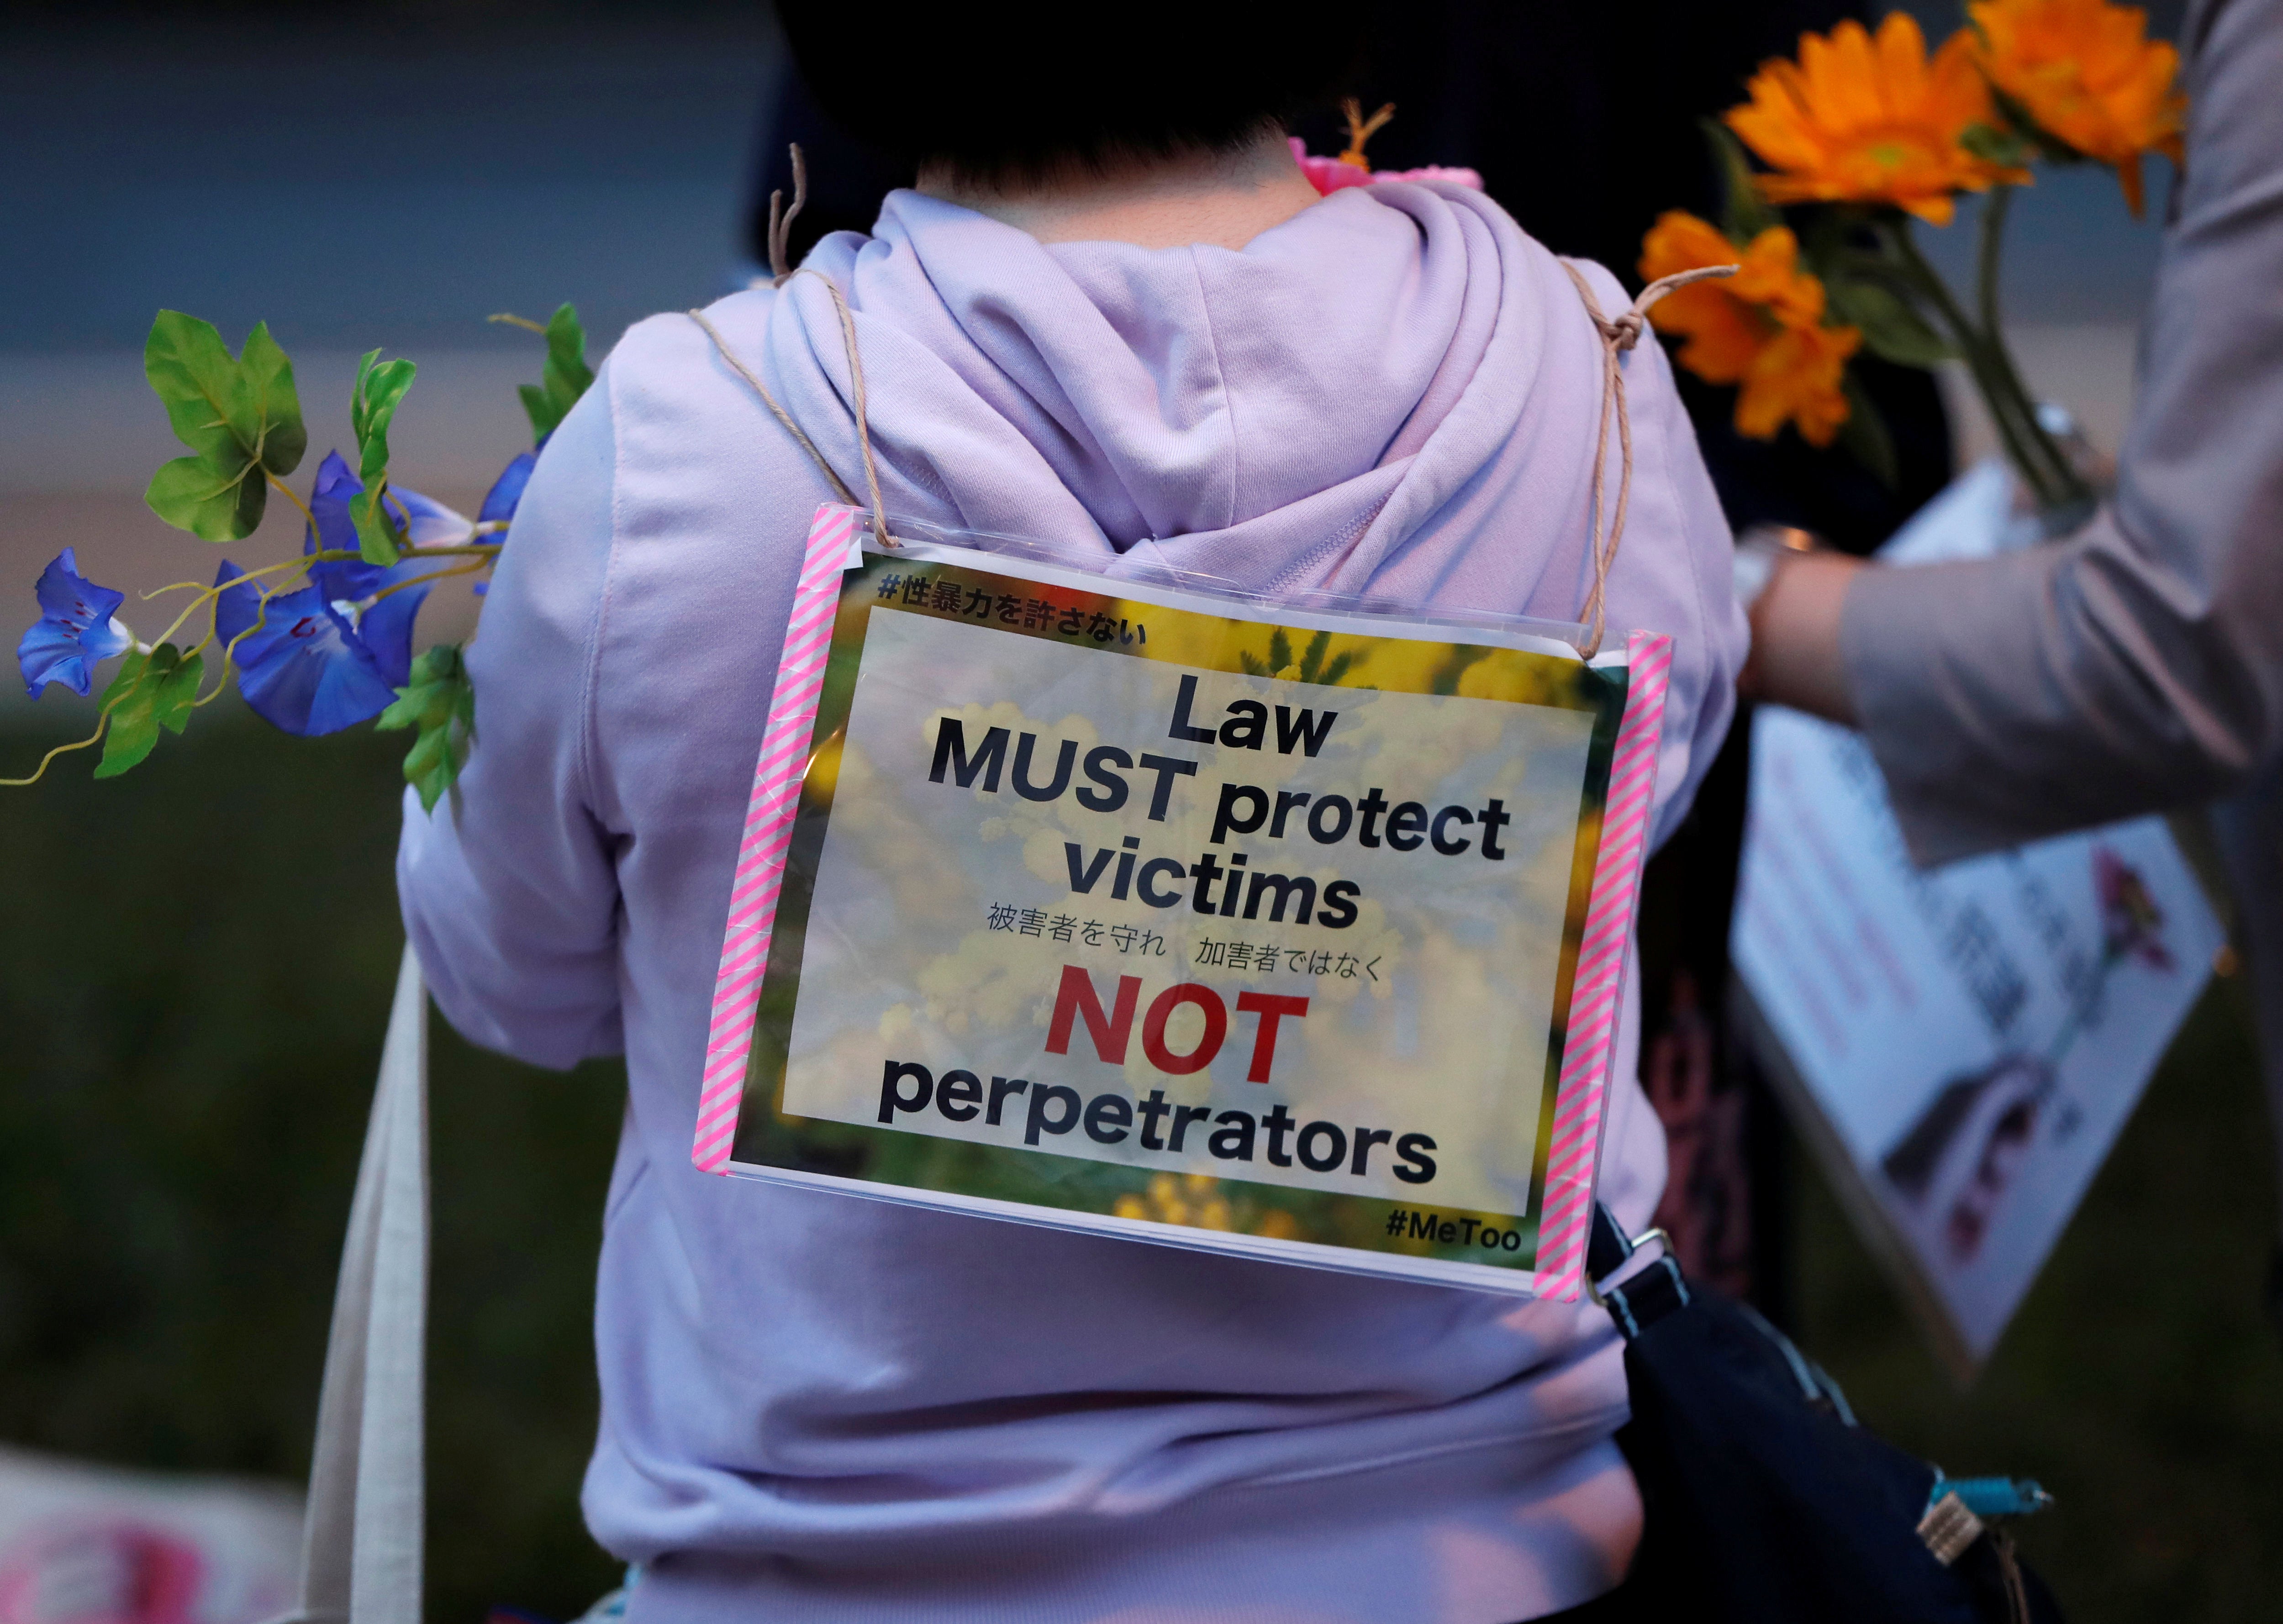 File. Protesters hold fowers at the rally called 'Flower Demo' to criticise acquittals in court cases of alleged rape in Japan in 2019